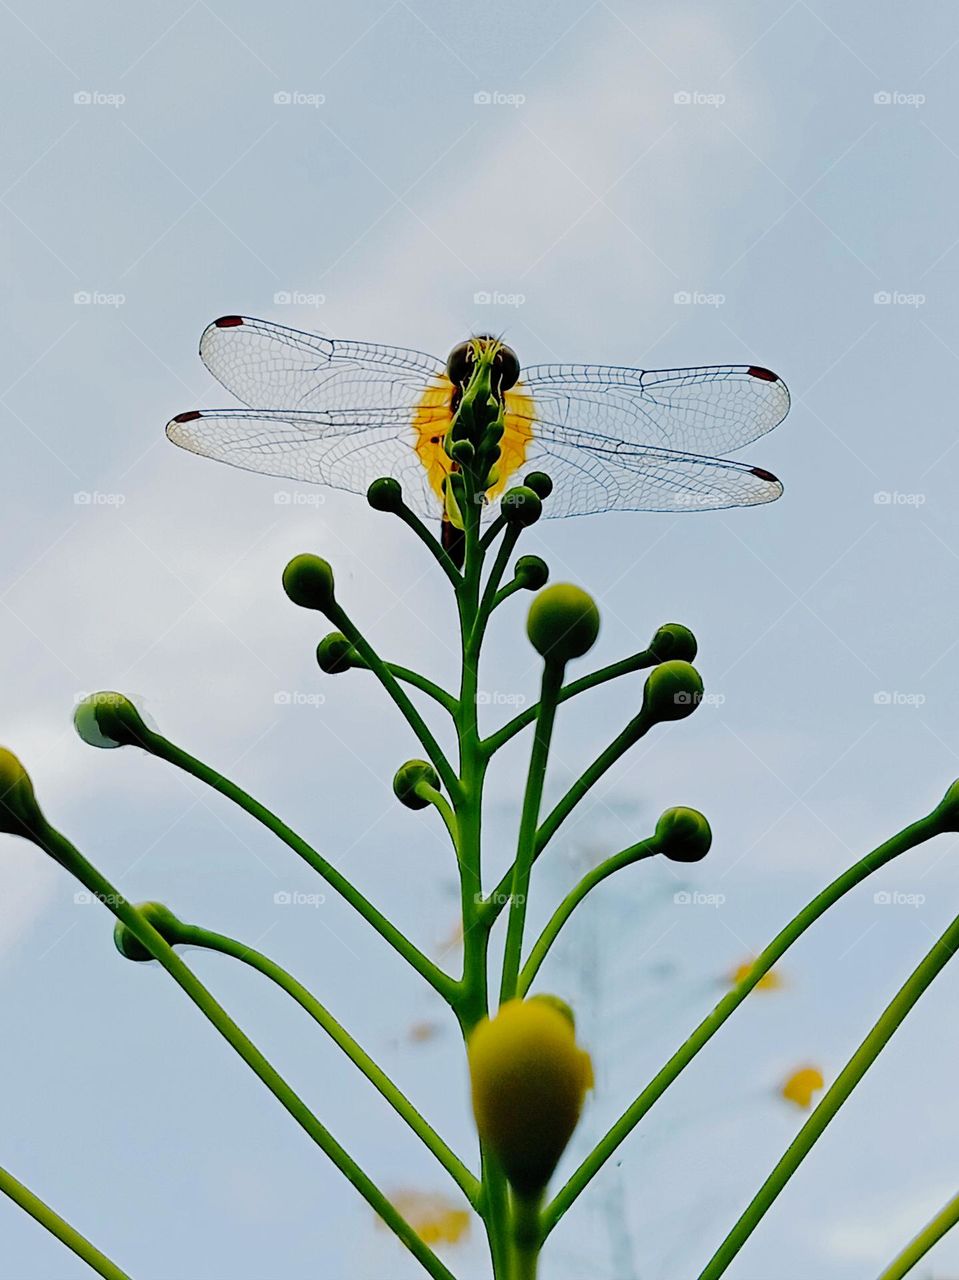 Buds and dragonfly.